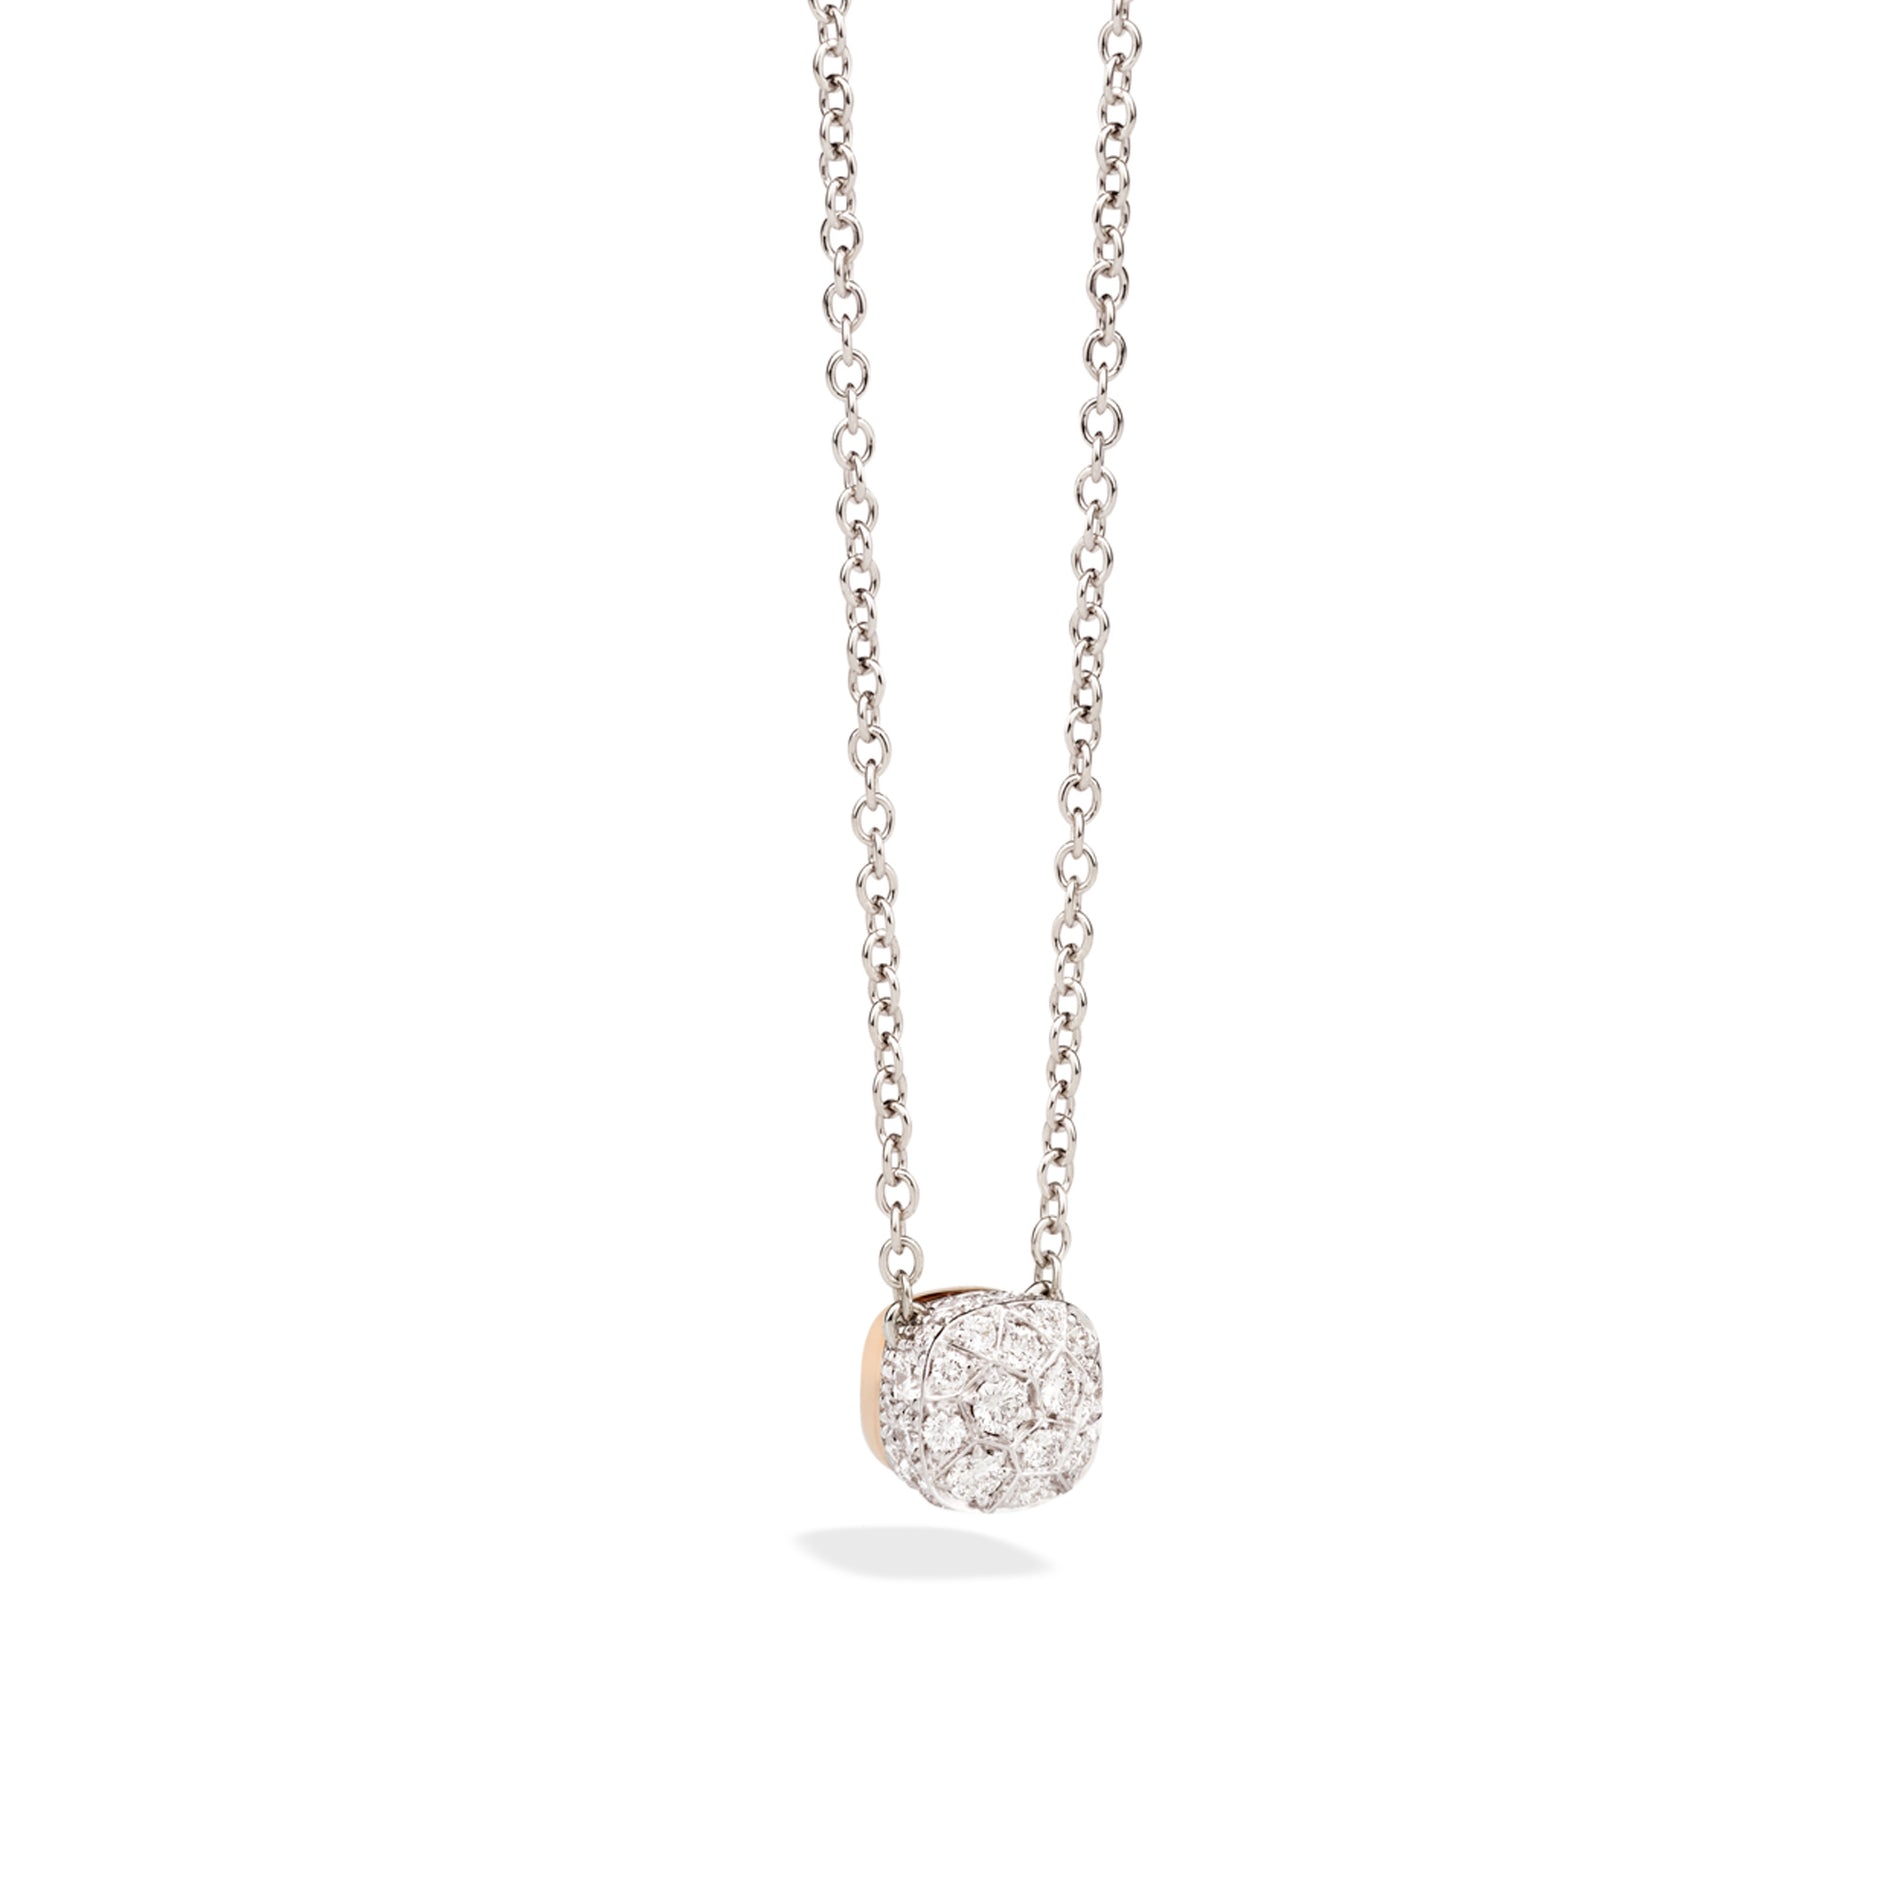 Nudo Necklace with Petit Pendant in 18k Rose and White Gold and Pave Diamonds - Orsini Jewellers NZ